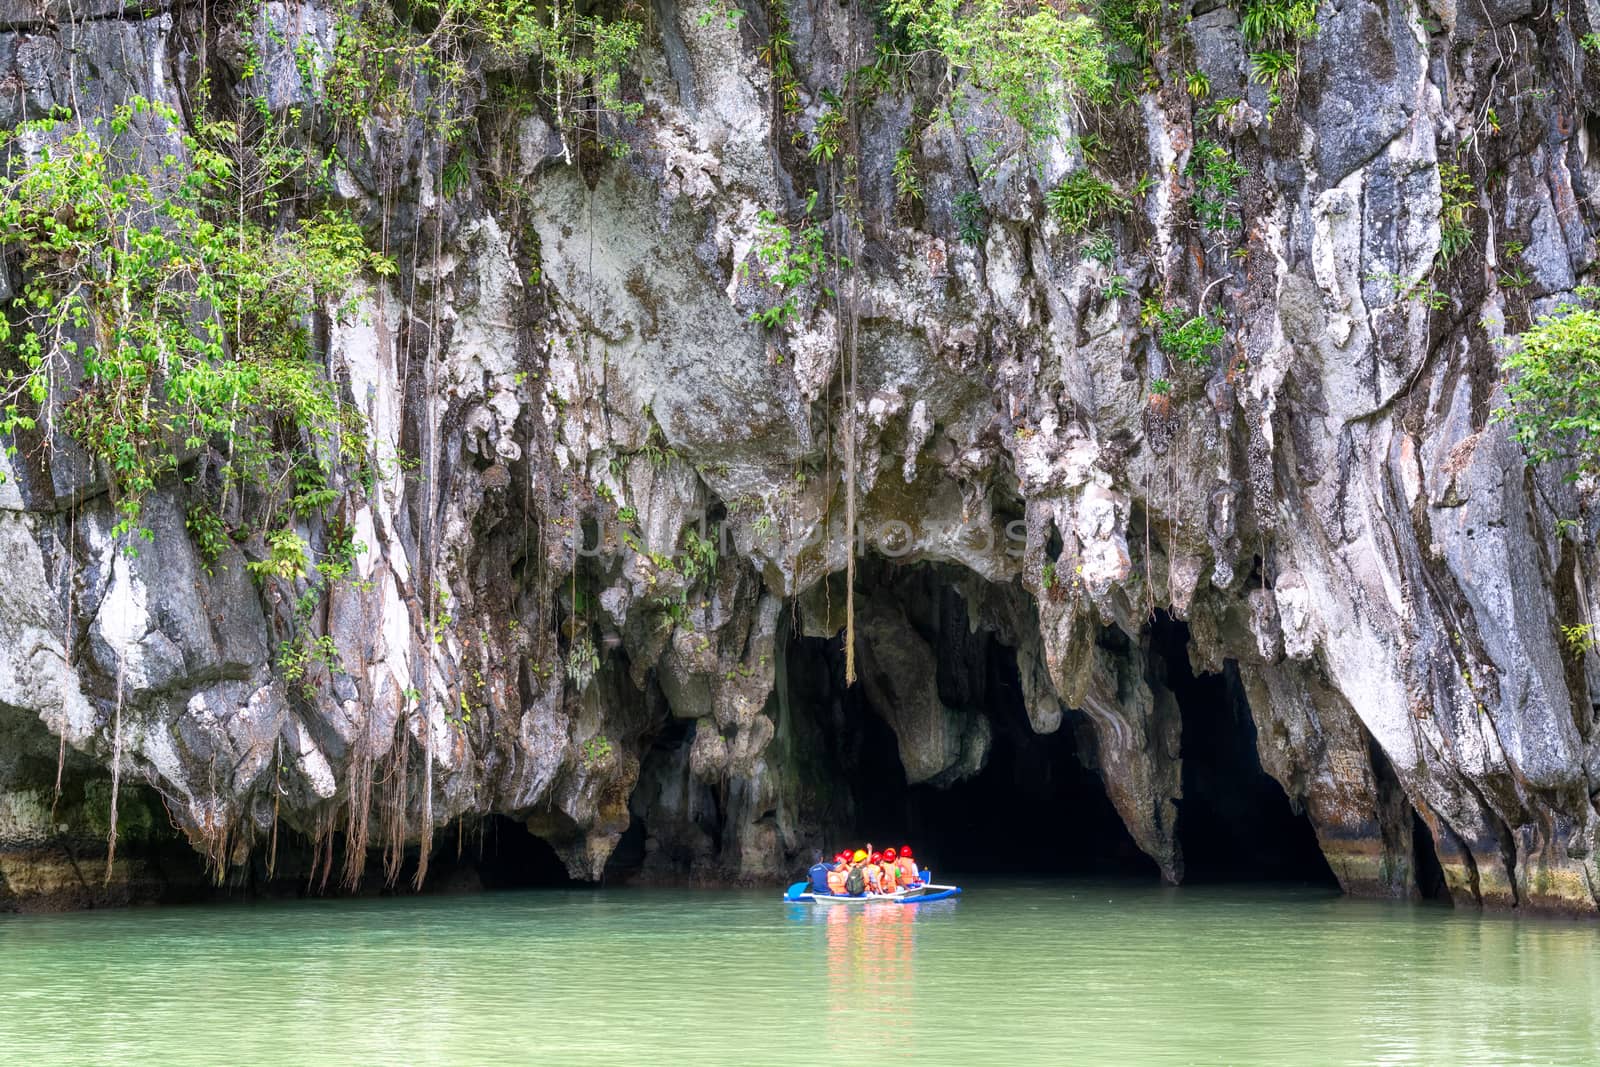 Puerto Princesa, Philippines  - May 24, 2014:Visitors enter the Subterranean River in Puerto Princessa. Puerto Princesa Underground River as one of the New 7 Wonders of Nature. El Nido, Philippines  - May 22, 2014: Island hopping with traditional banca boat in El Nido , Palawan - Philippines . Island hopping is popular activity of tourists visiting Palawan.PUERTO PRINCESA,  PHILIPPINES - MAY 24, 2014: Visitors enter the Subterranean River in Puerto Princessa on May 24.  